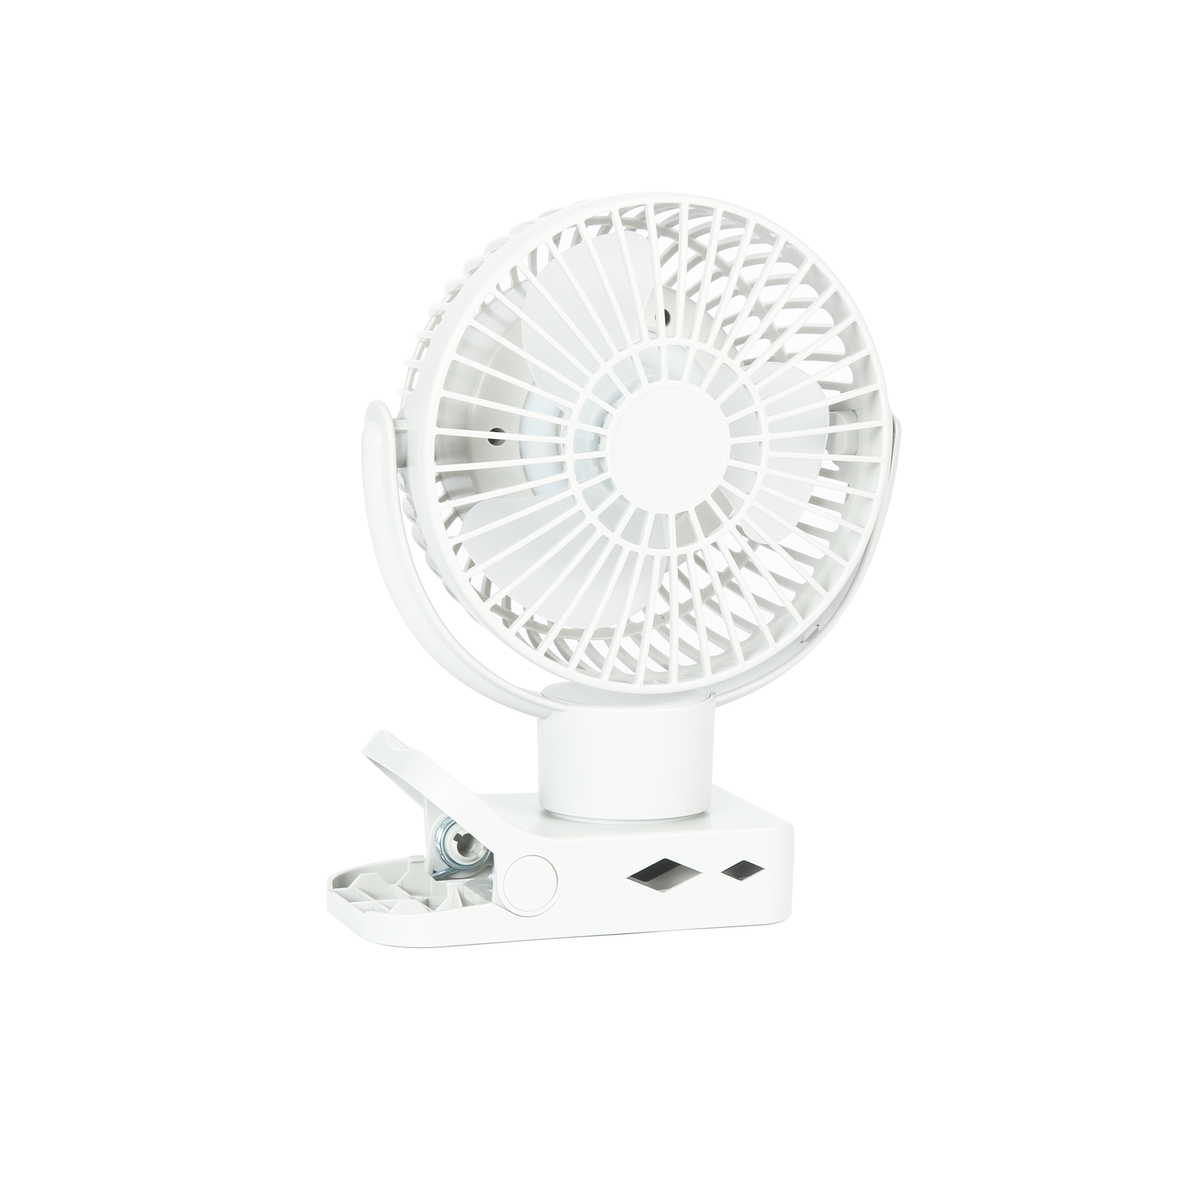 Breezie Fan with LED Light & Power Bank– Limitless